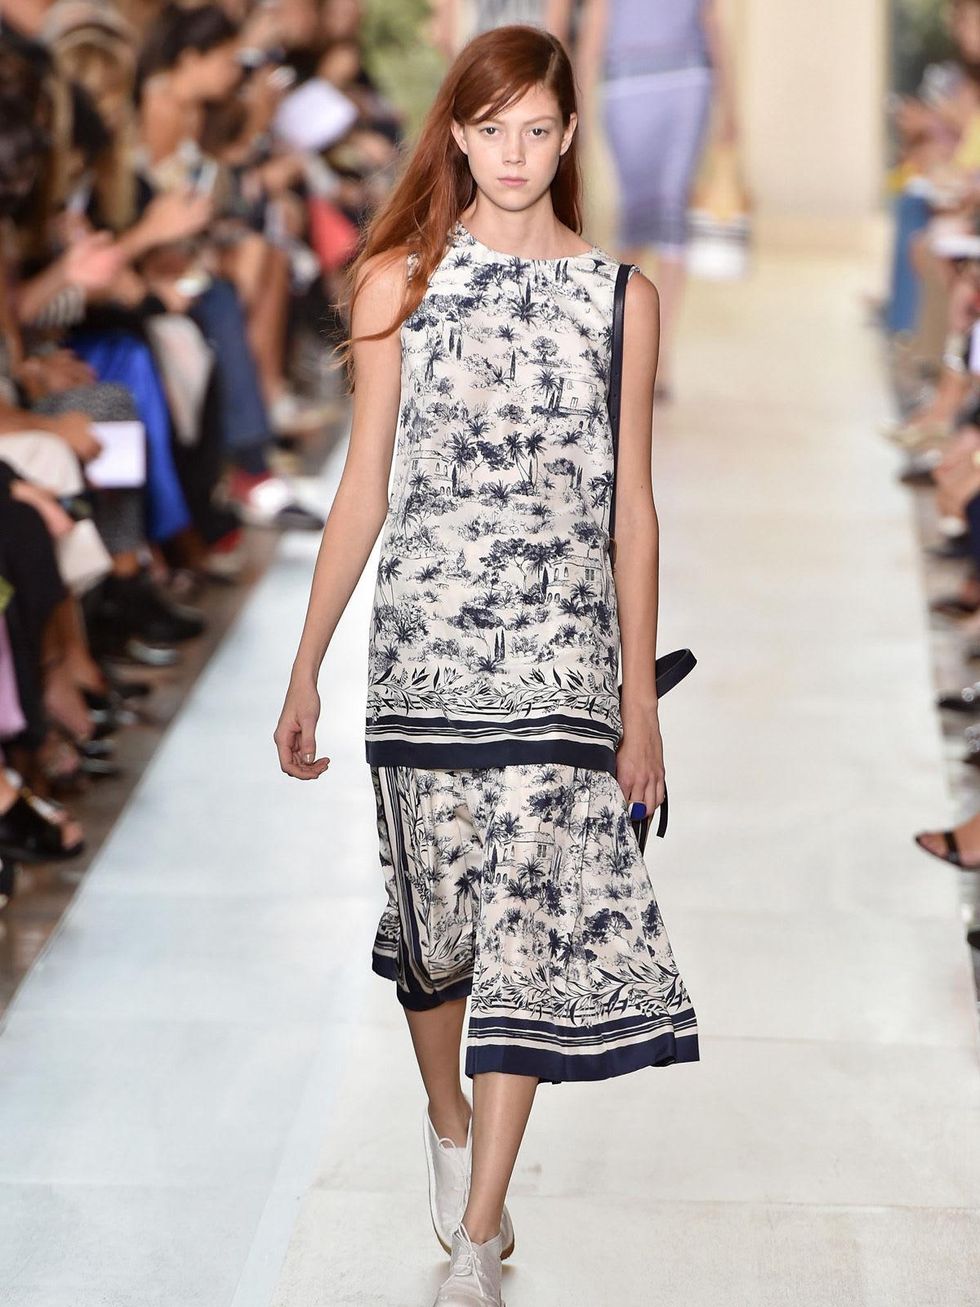 Fashion Week spring 2015 Tory Burch black-and-white Photo by Slaven Vlasic-Getty Images for Mercedes-Benz